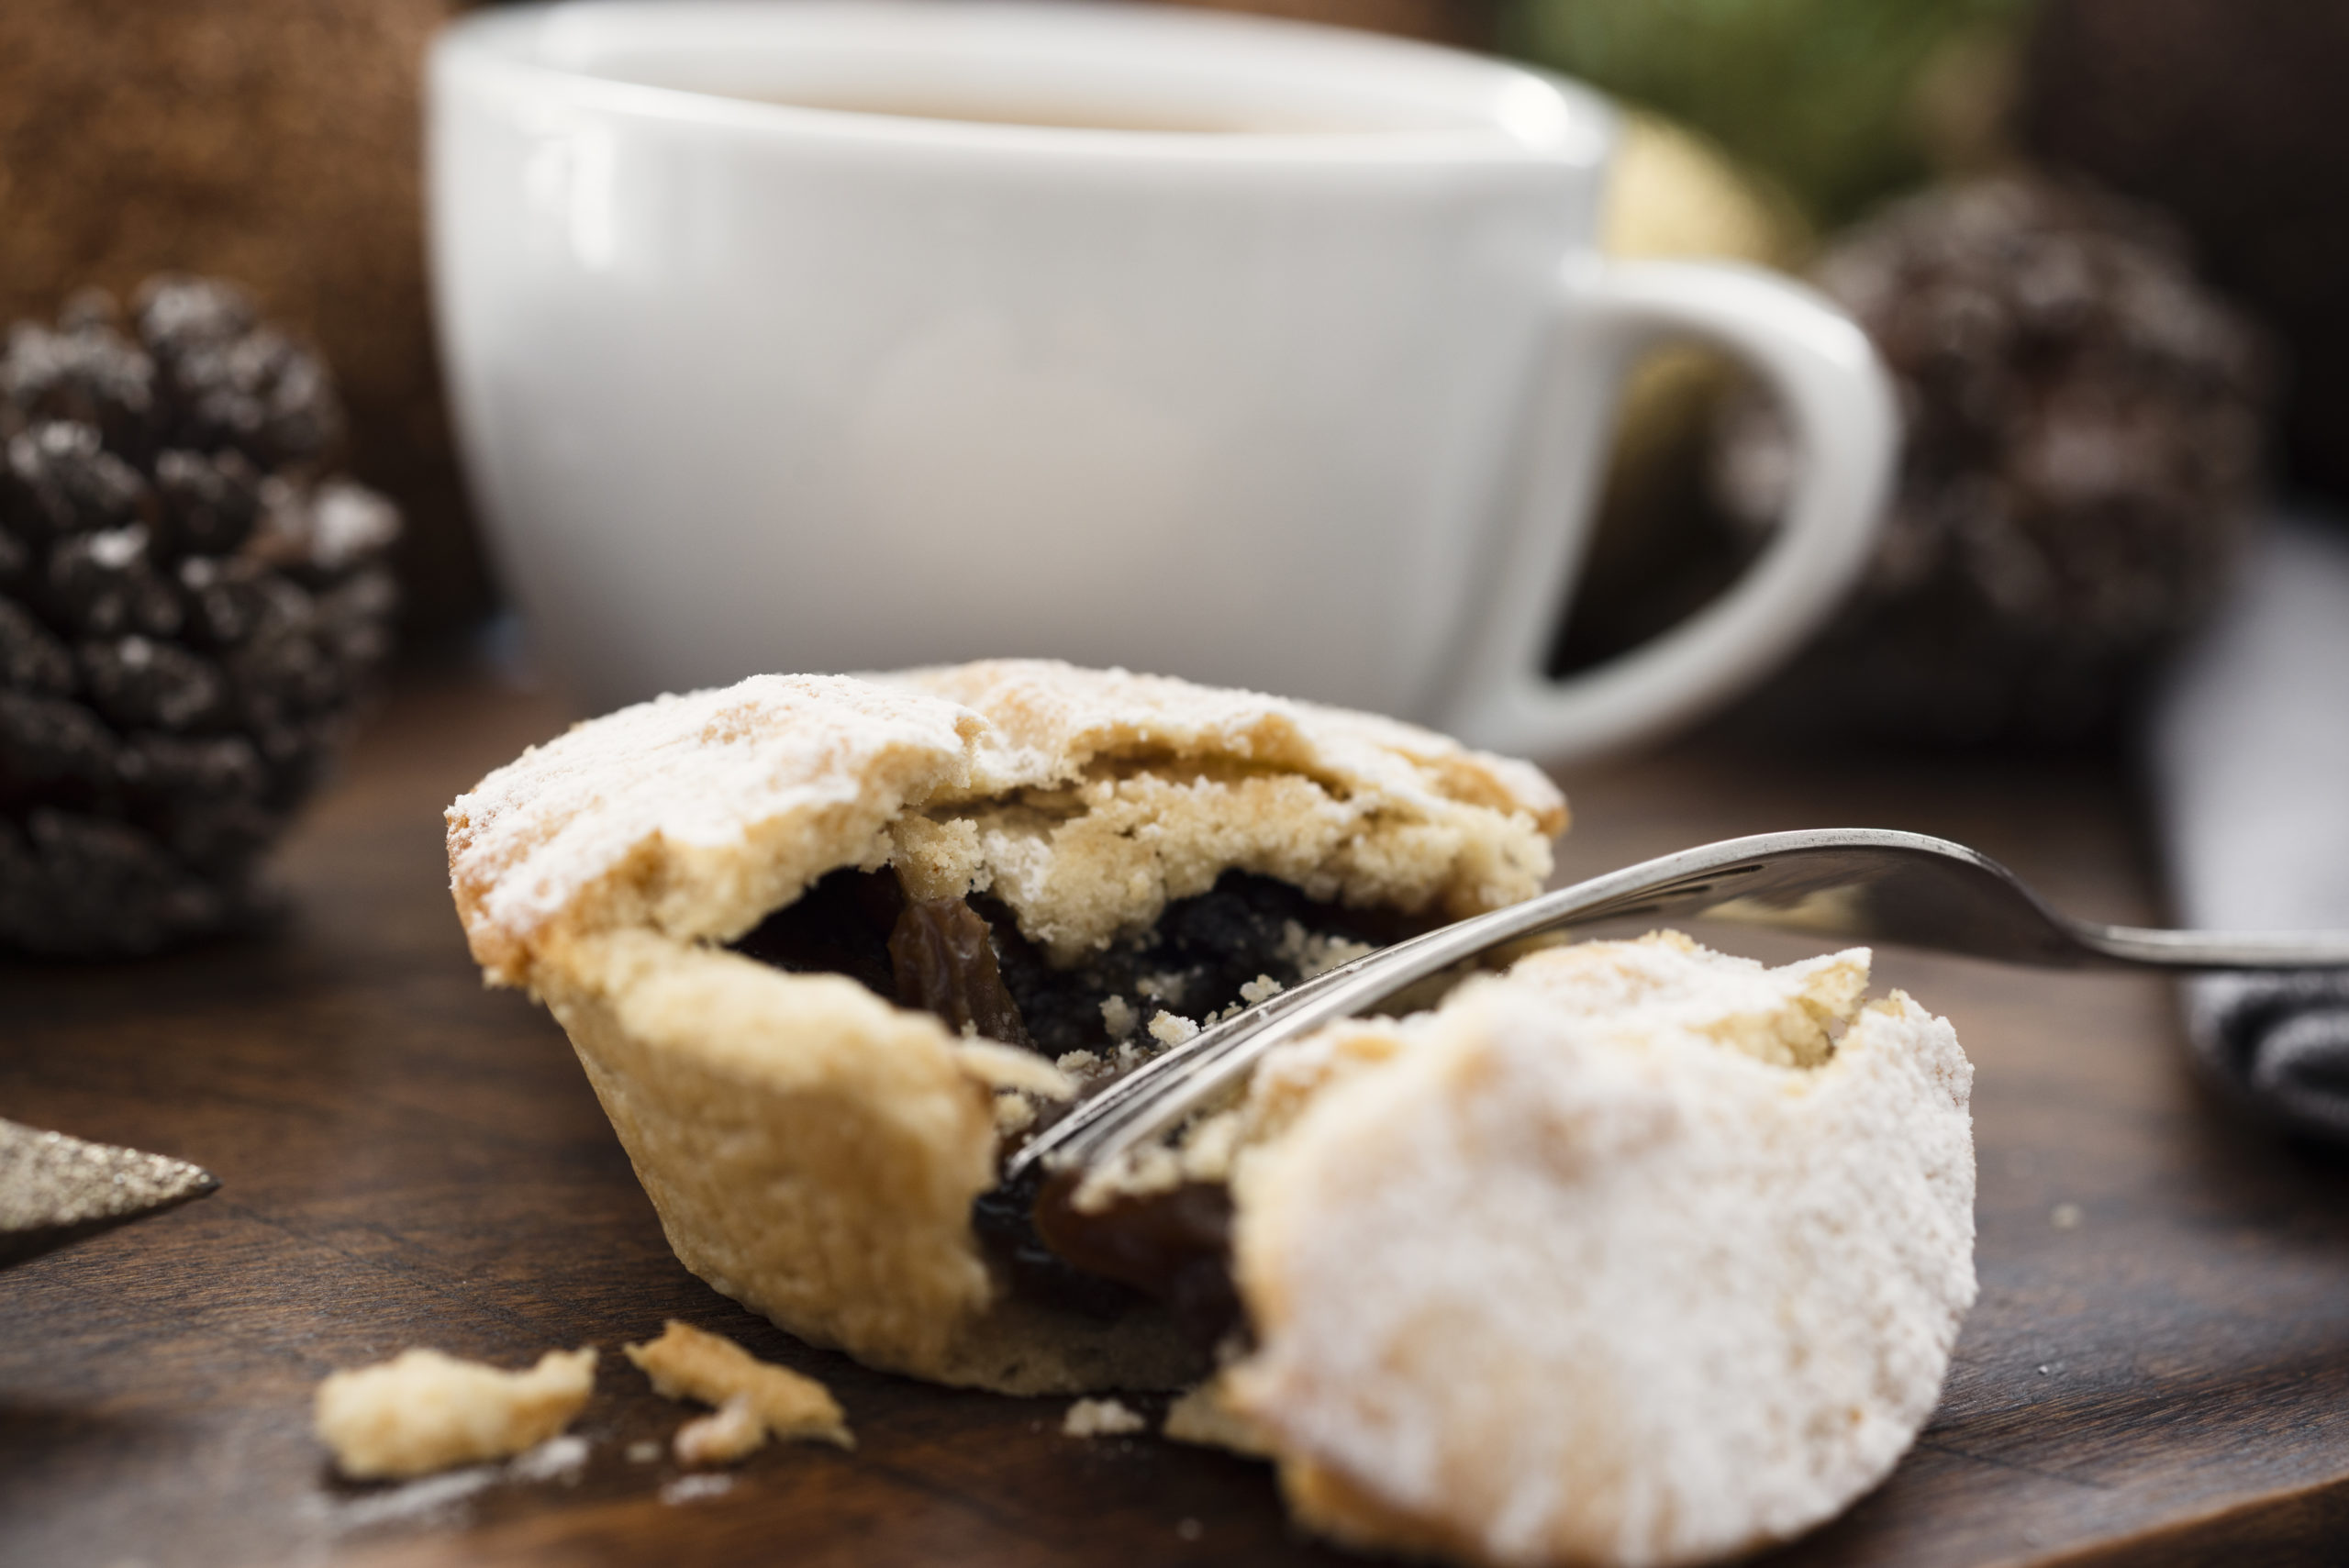 Close up of a mince pie split open with fork dusted with icing sugar, served with a cup of coffee with christmas decorations in the background. Festive Christmas food scene.